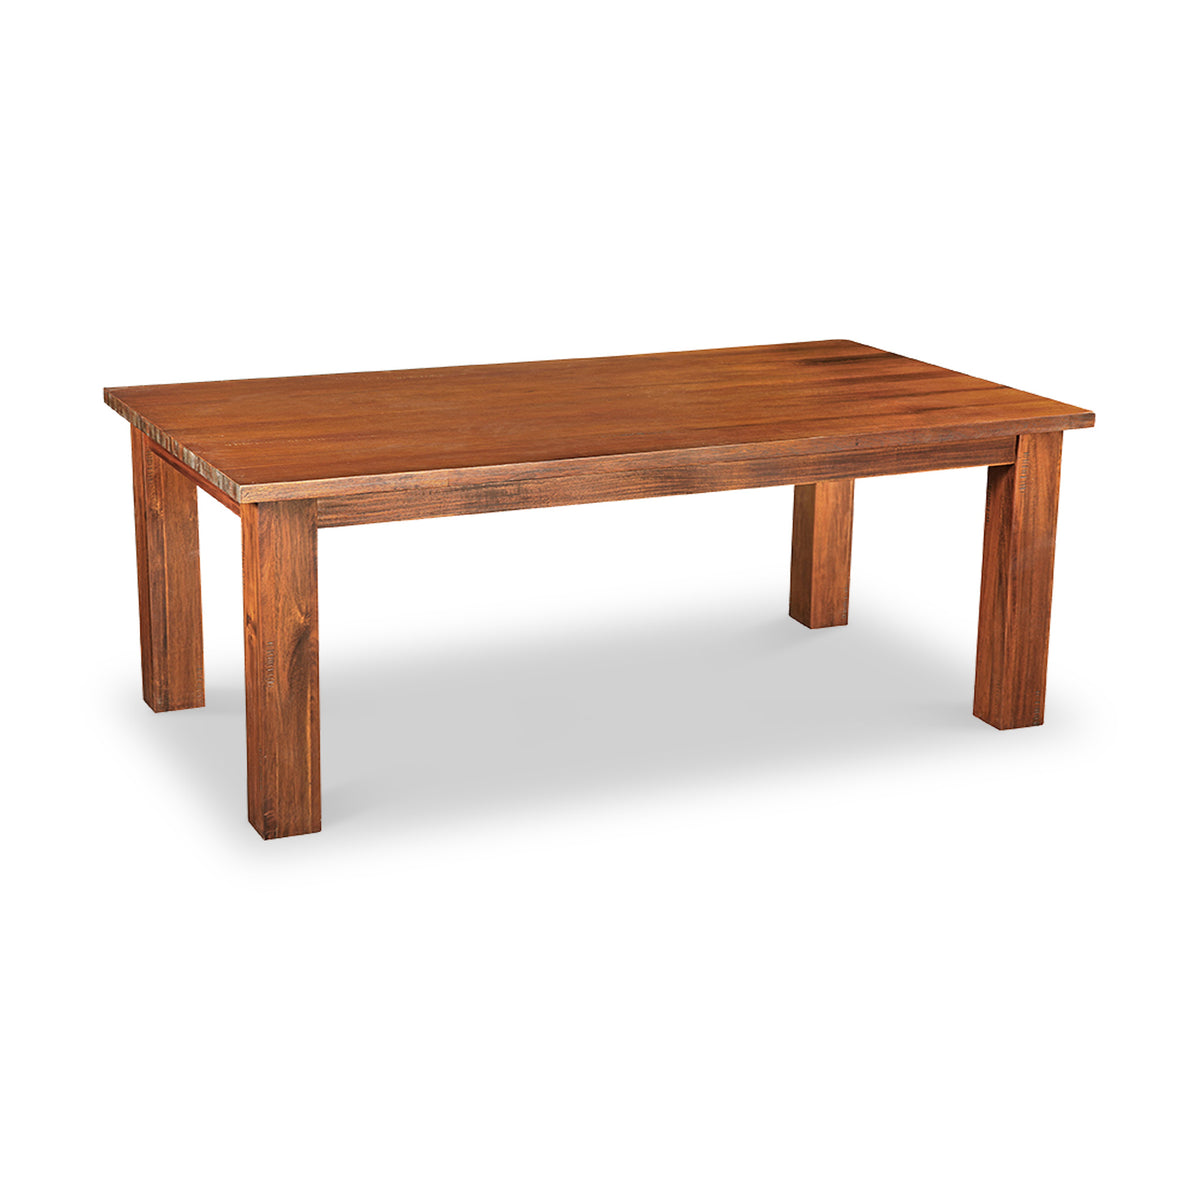 Ladock 180cm Dining Table from Roseland Furniture